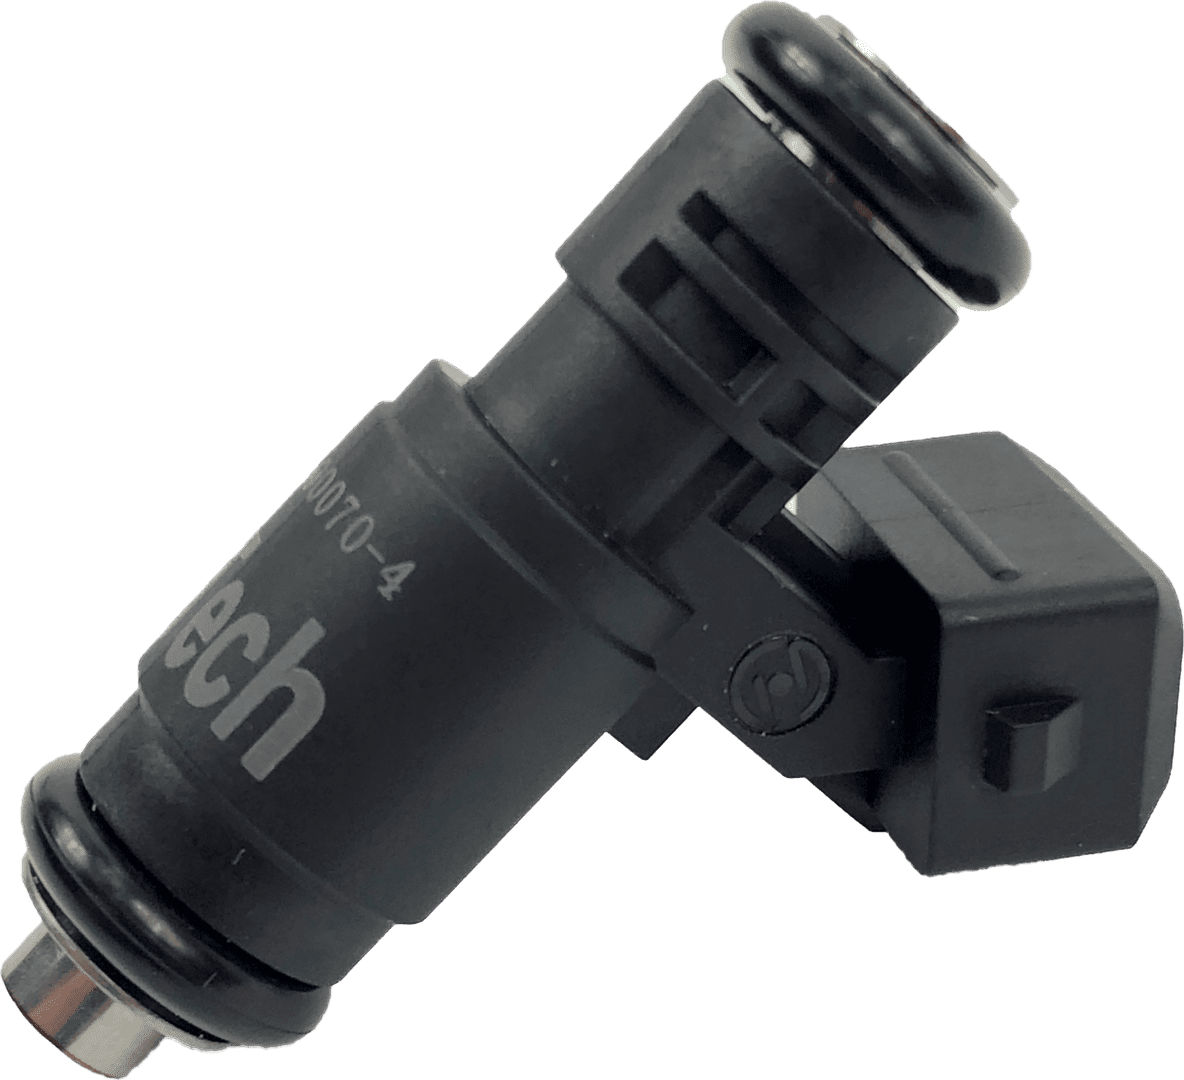 FiTech 10036 Go Fuel Series Replacement Electronic Fuel Injector (36-lb, individual)